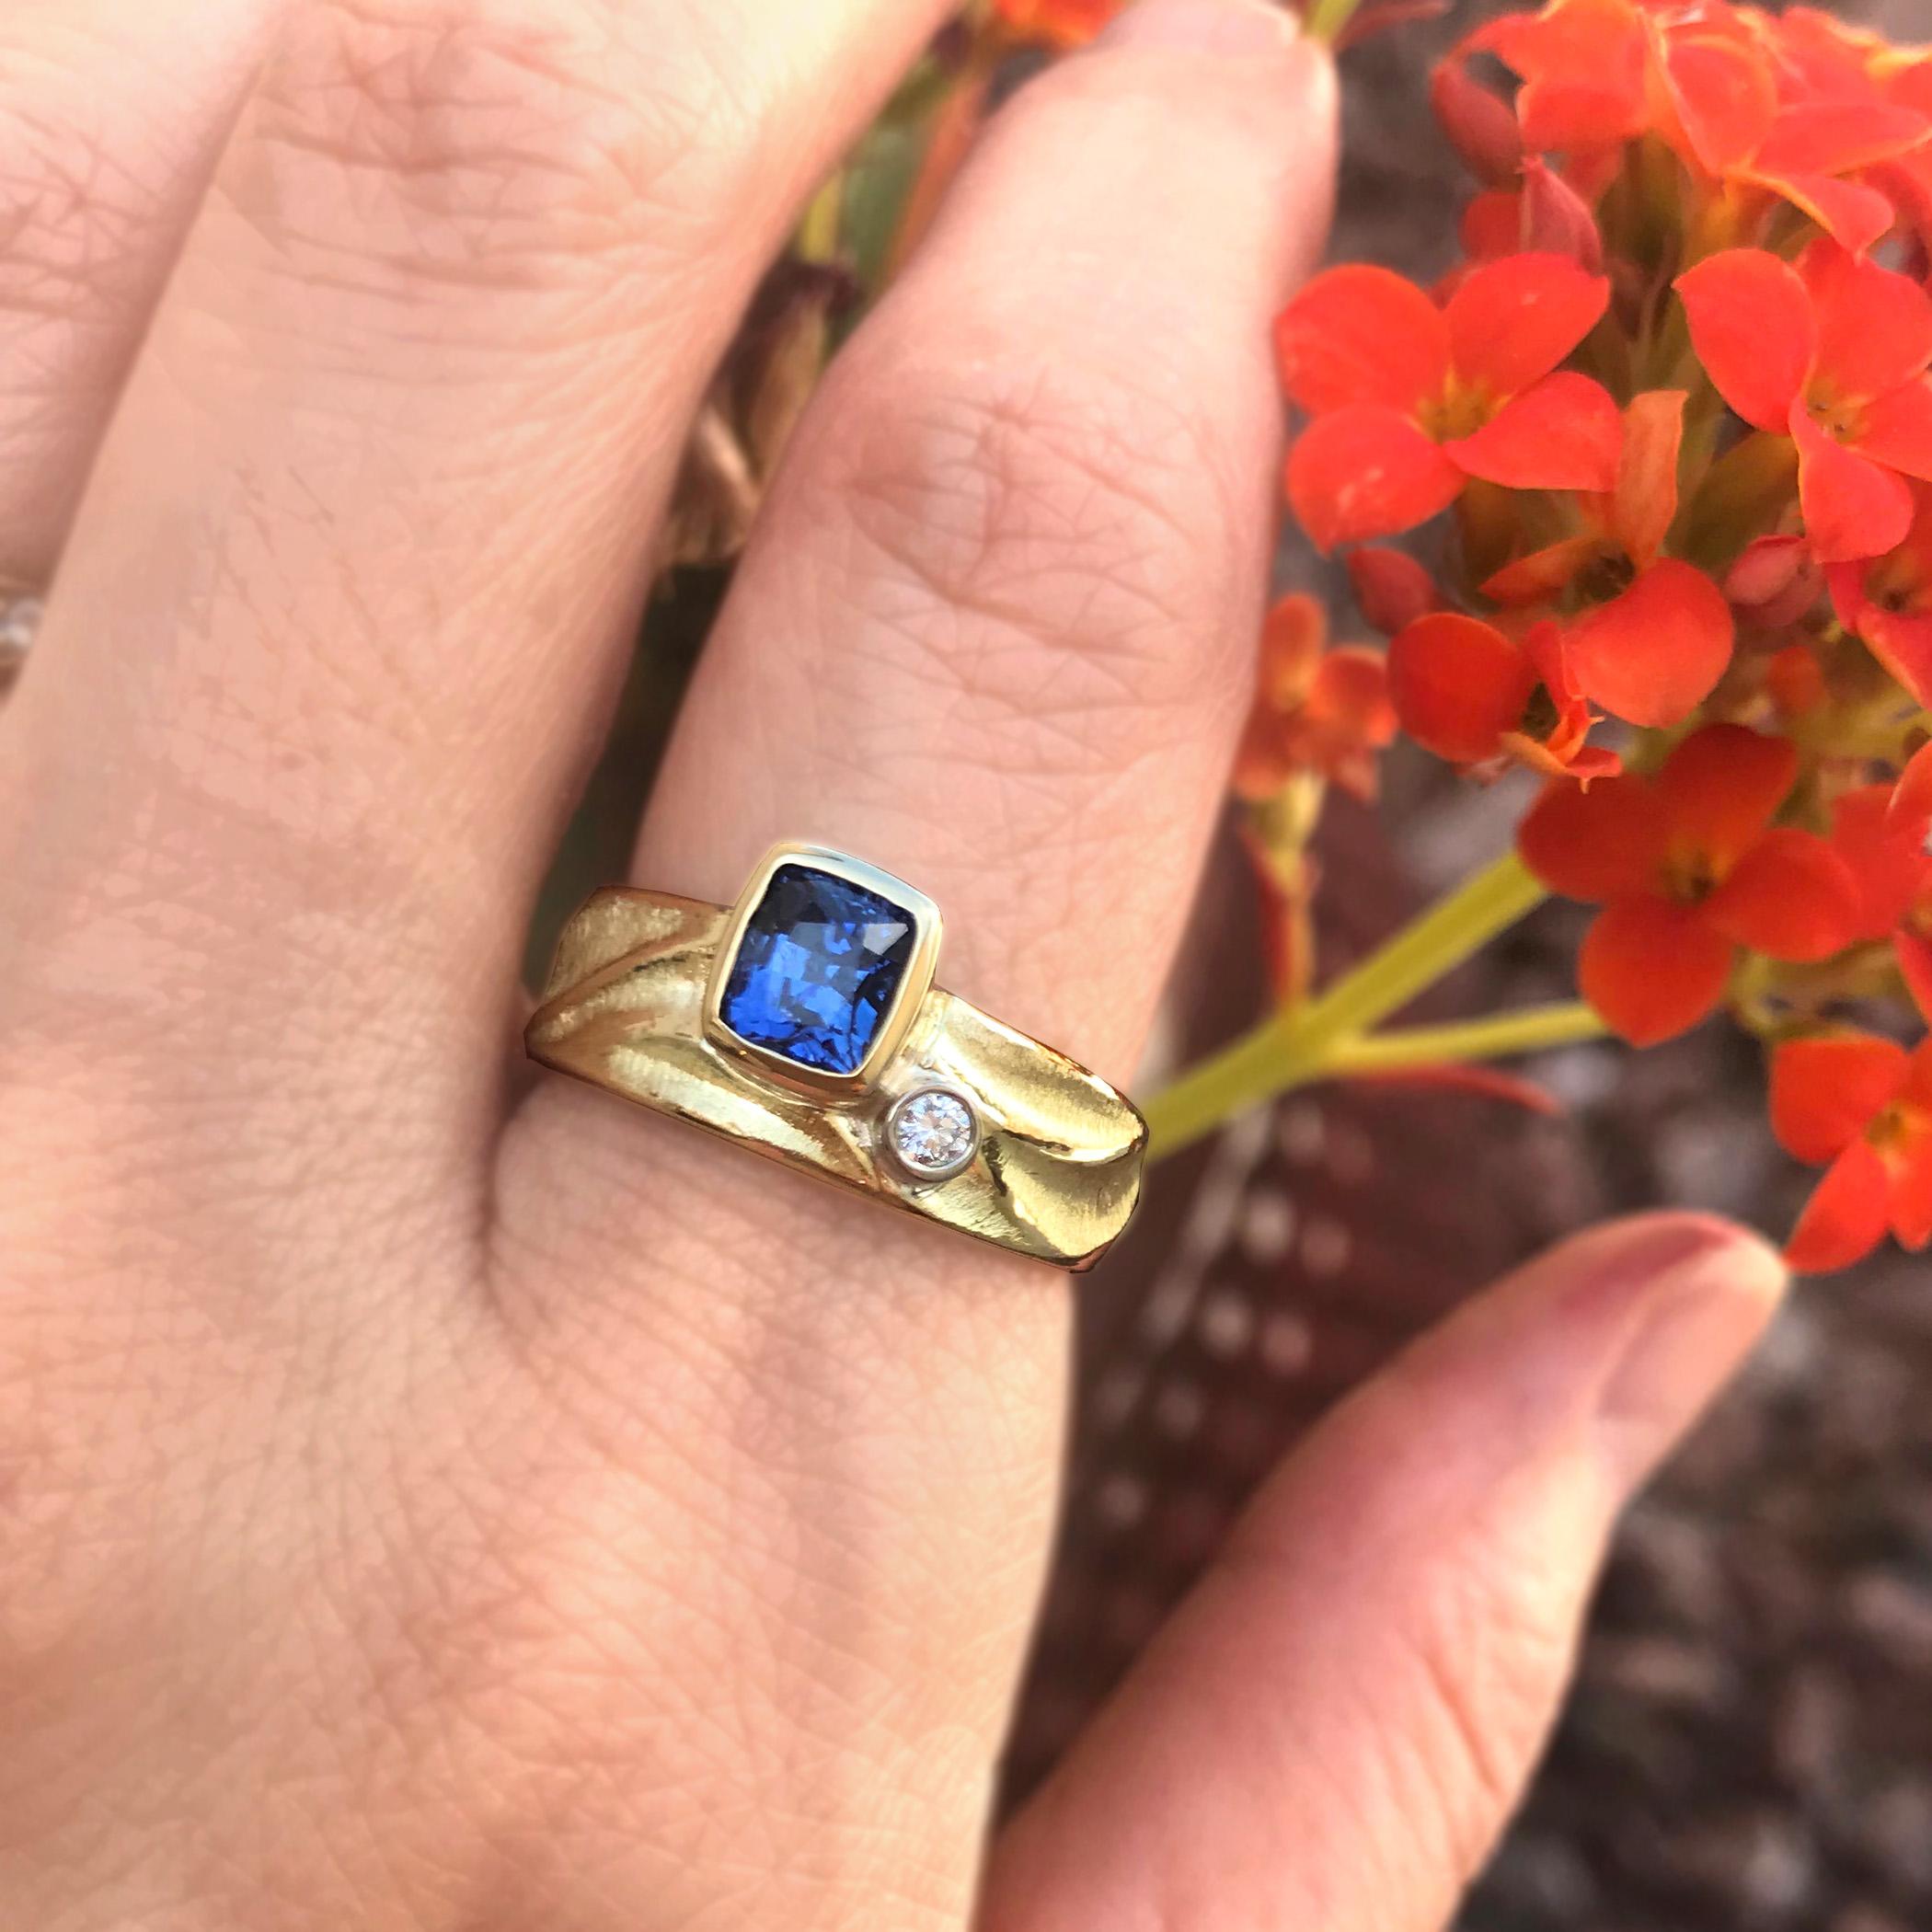 K.Mita's 1.17ct Blue Sapphire Geo Ring is made from 18K Yellow Gold with a 0.04ct side Diamond set in 18K Palladium White Gold. Sapphire is the birthstone for September and the second hardest mineral next to diamonds, making it a great selection for